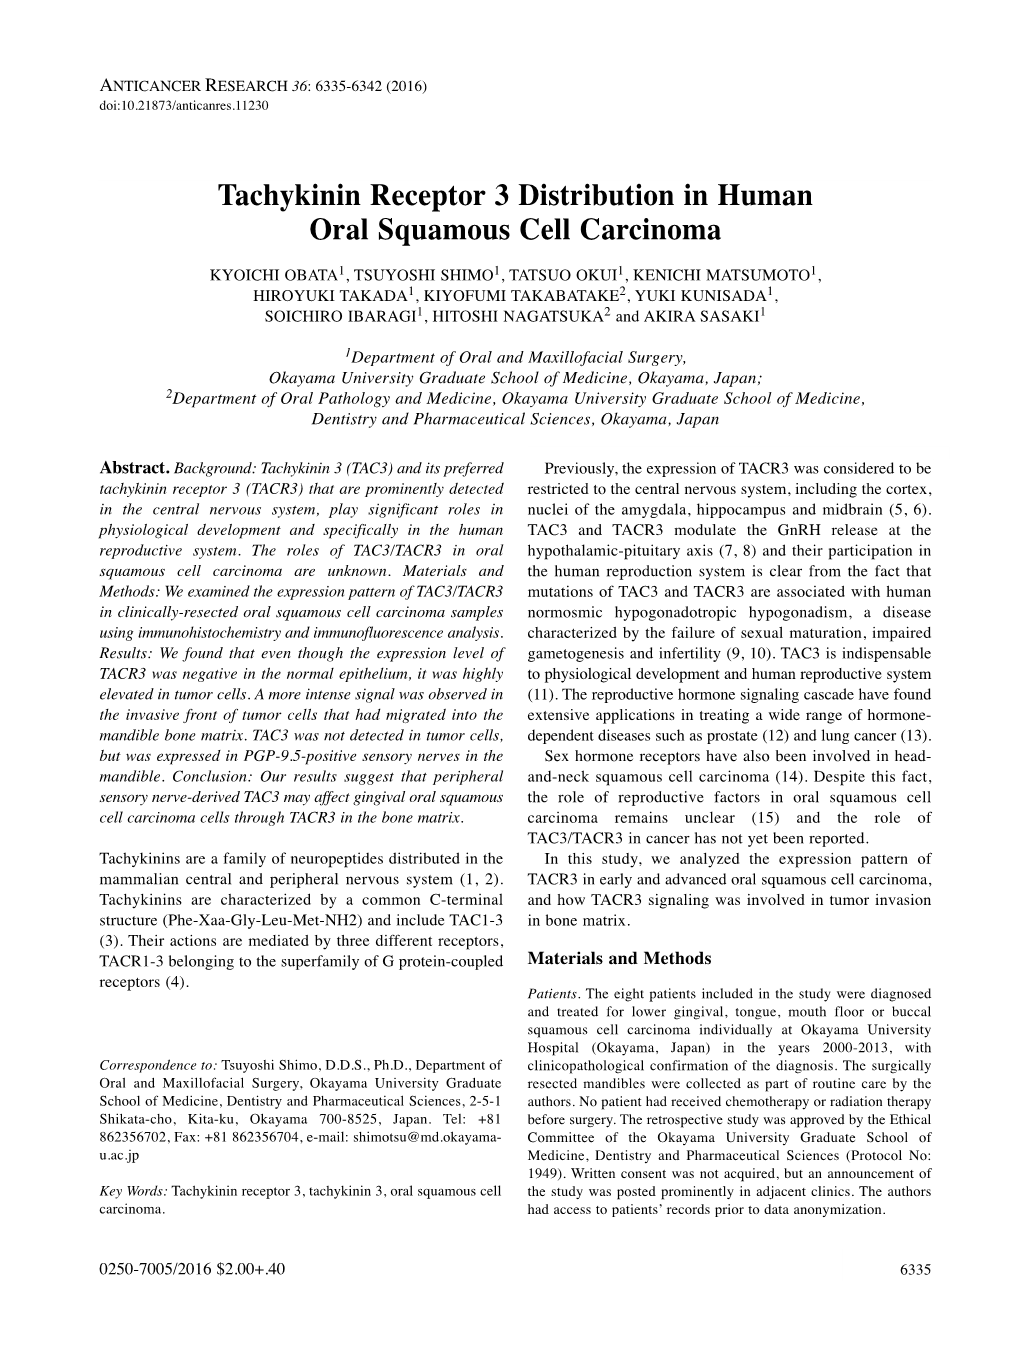 Tachykinin Receptor 3 Distribution in Human Oral Squamous Cell